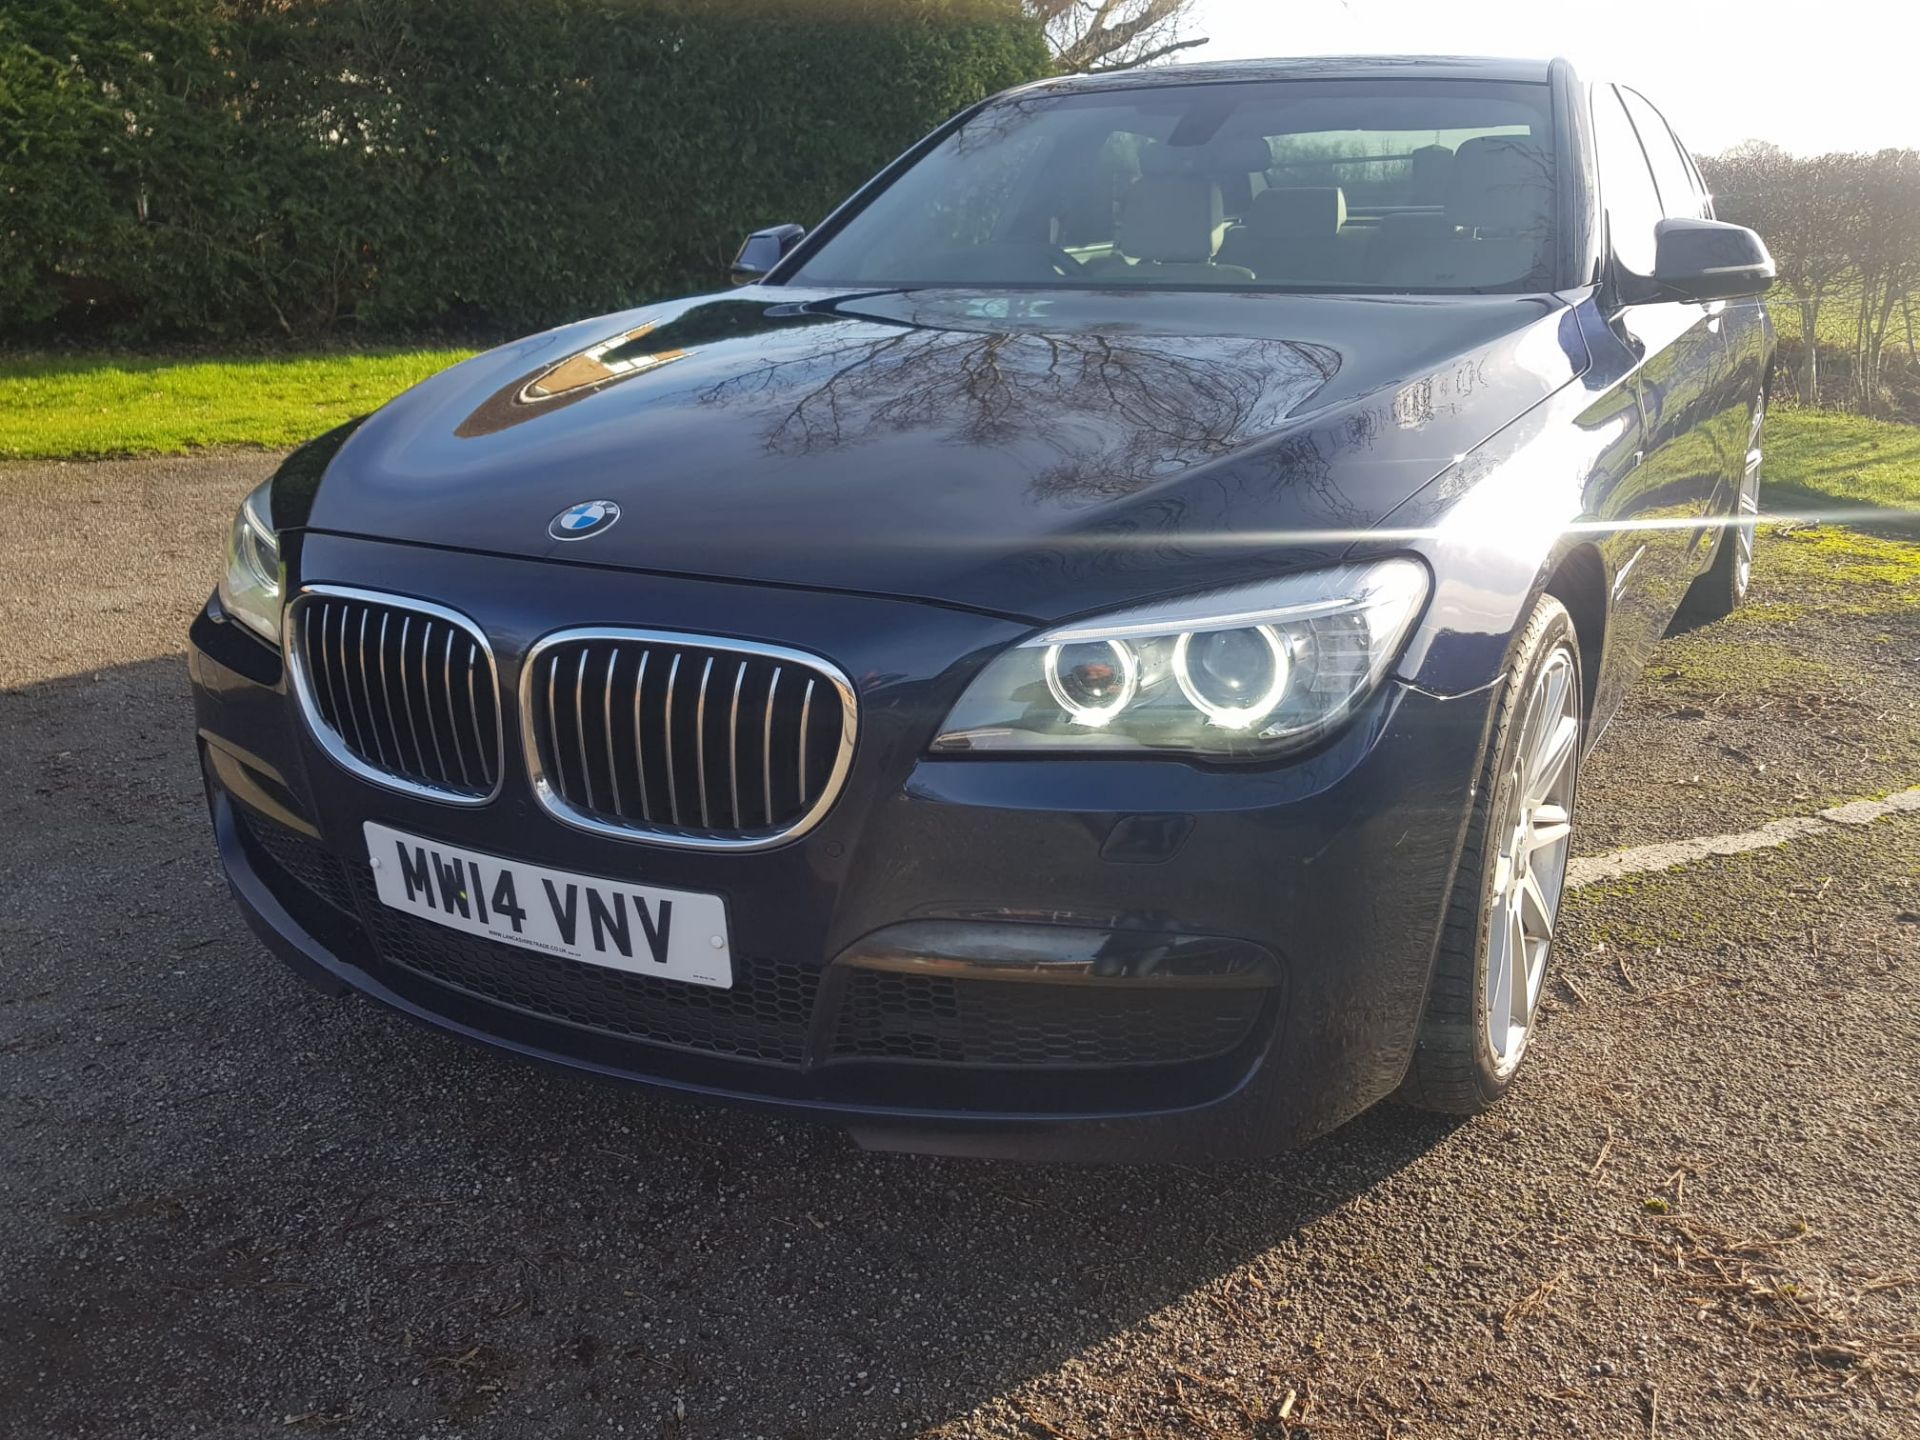 2014 730D M-SPORT SALOON - FULL SERVICE HISTORY - 115K MILES - Image 2 of 43